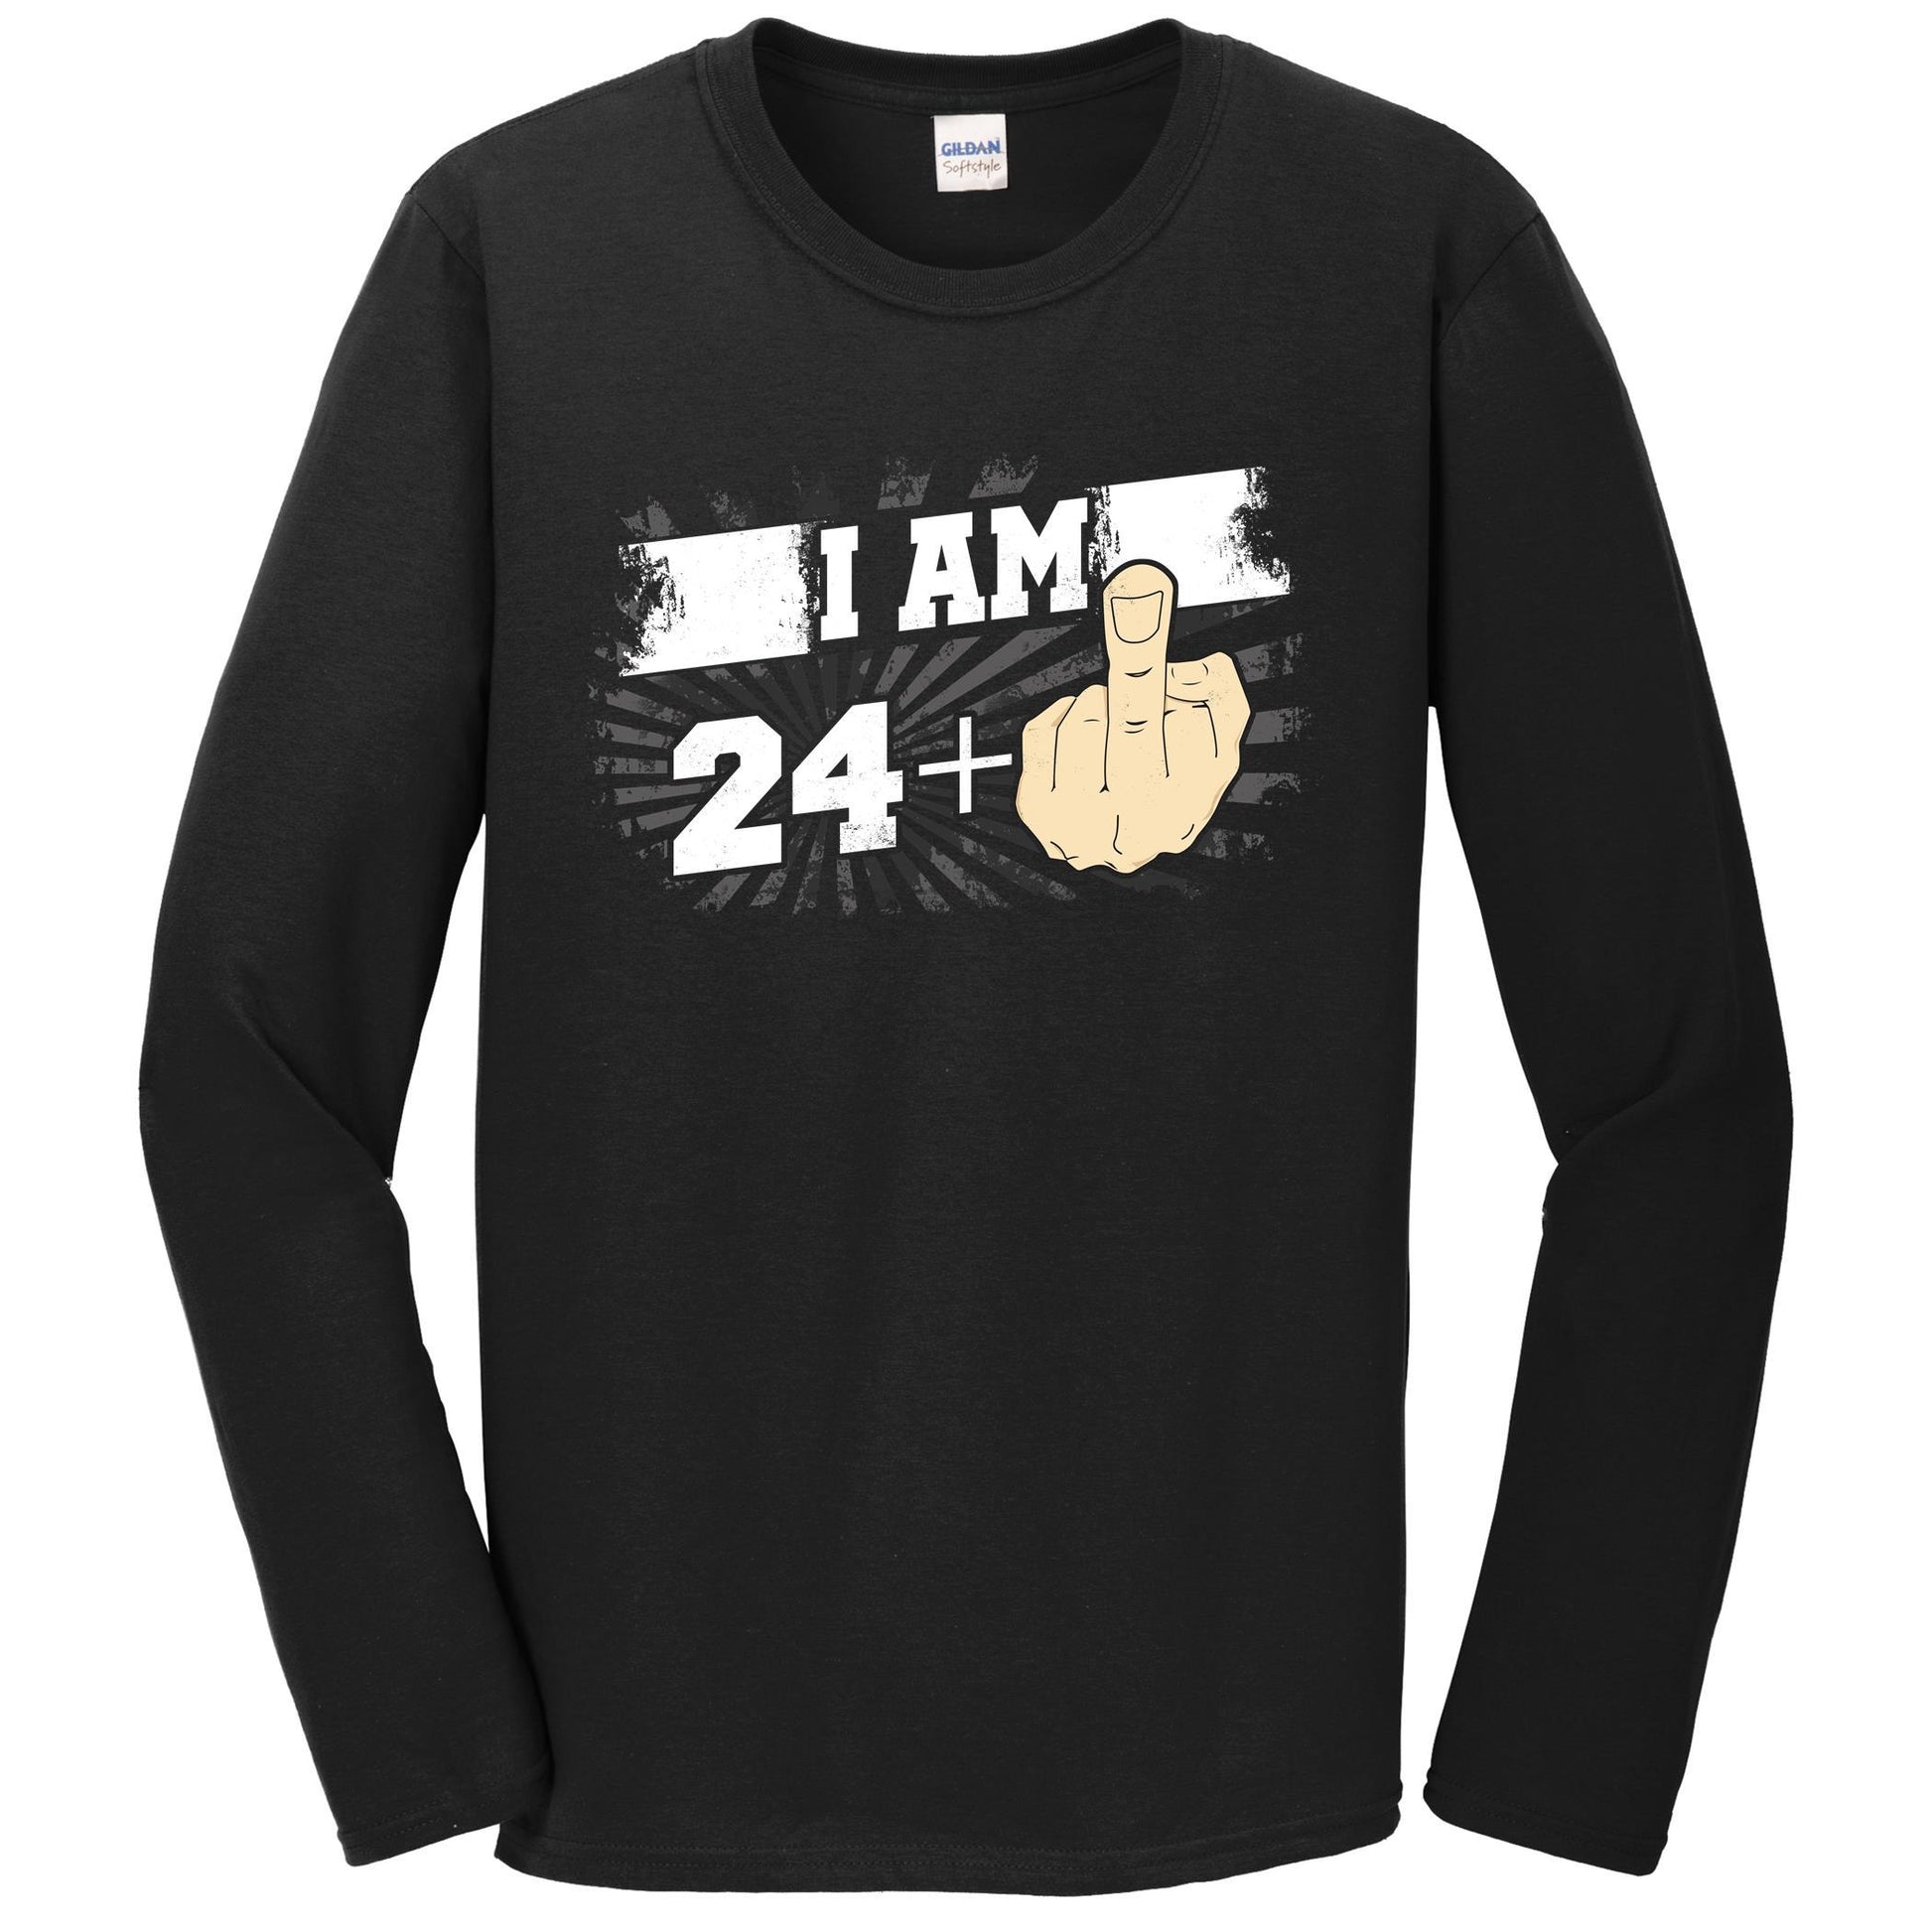 25th Birthday Shirt For Men - I Am 24 Plus Middle Finger 25 Years Old Long Sleeve T-Shirt